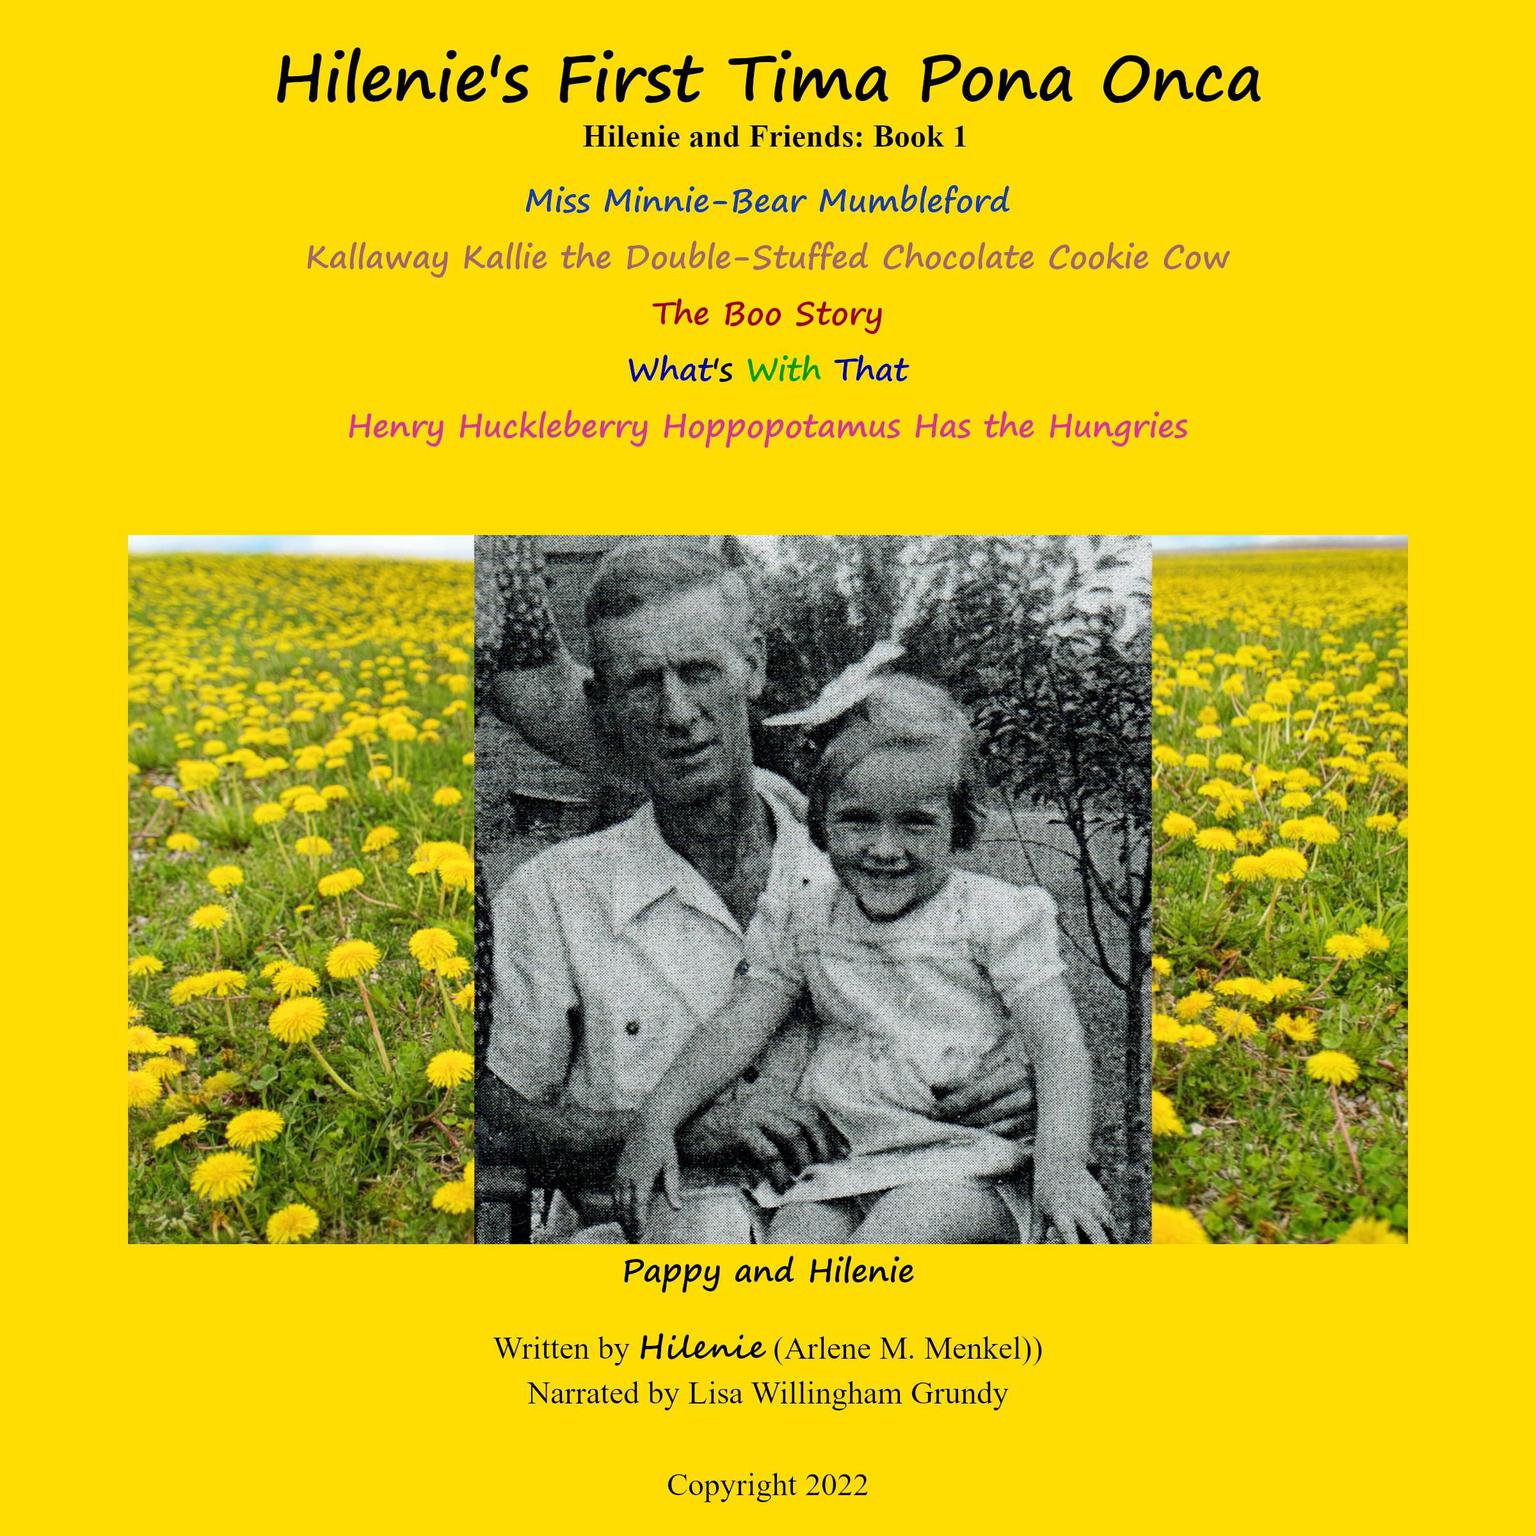 Hilenies First Tim-a Pon-a Onc-a (Abridged): Hilenie and Friends: Audiobook  Book Volume 1 Audiobook, by (Arlene) Menkel